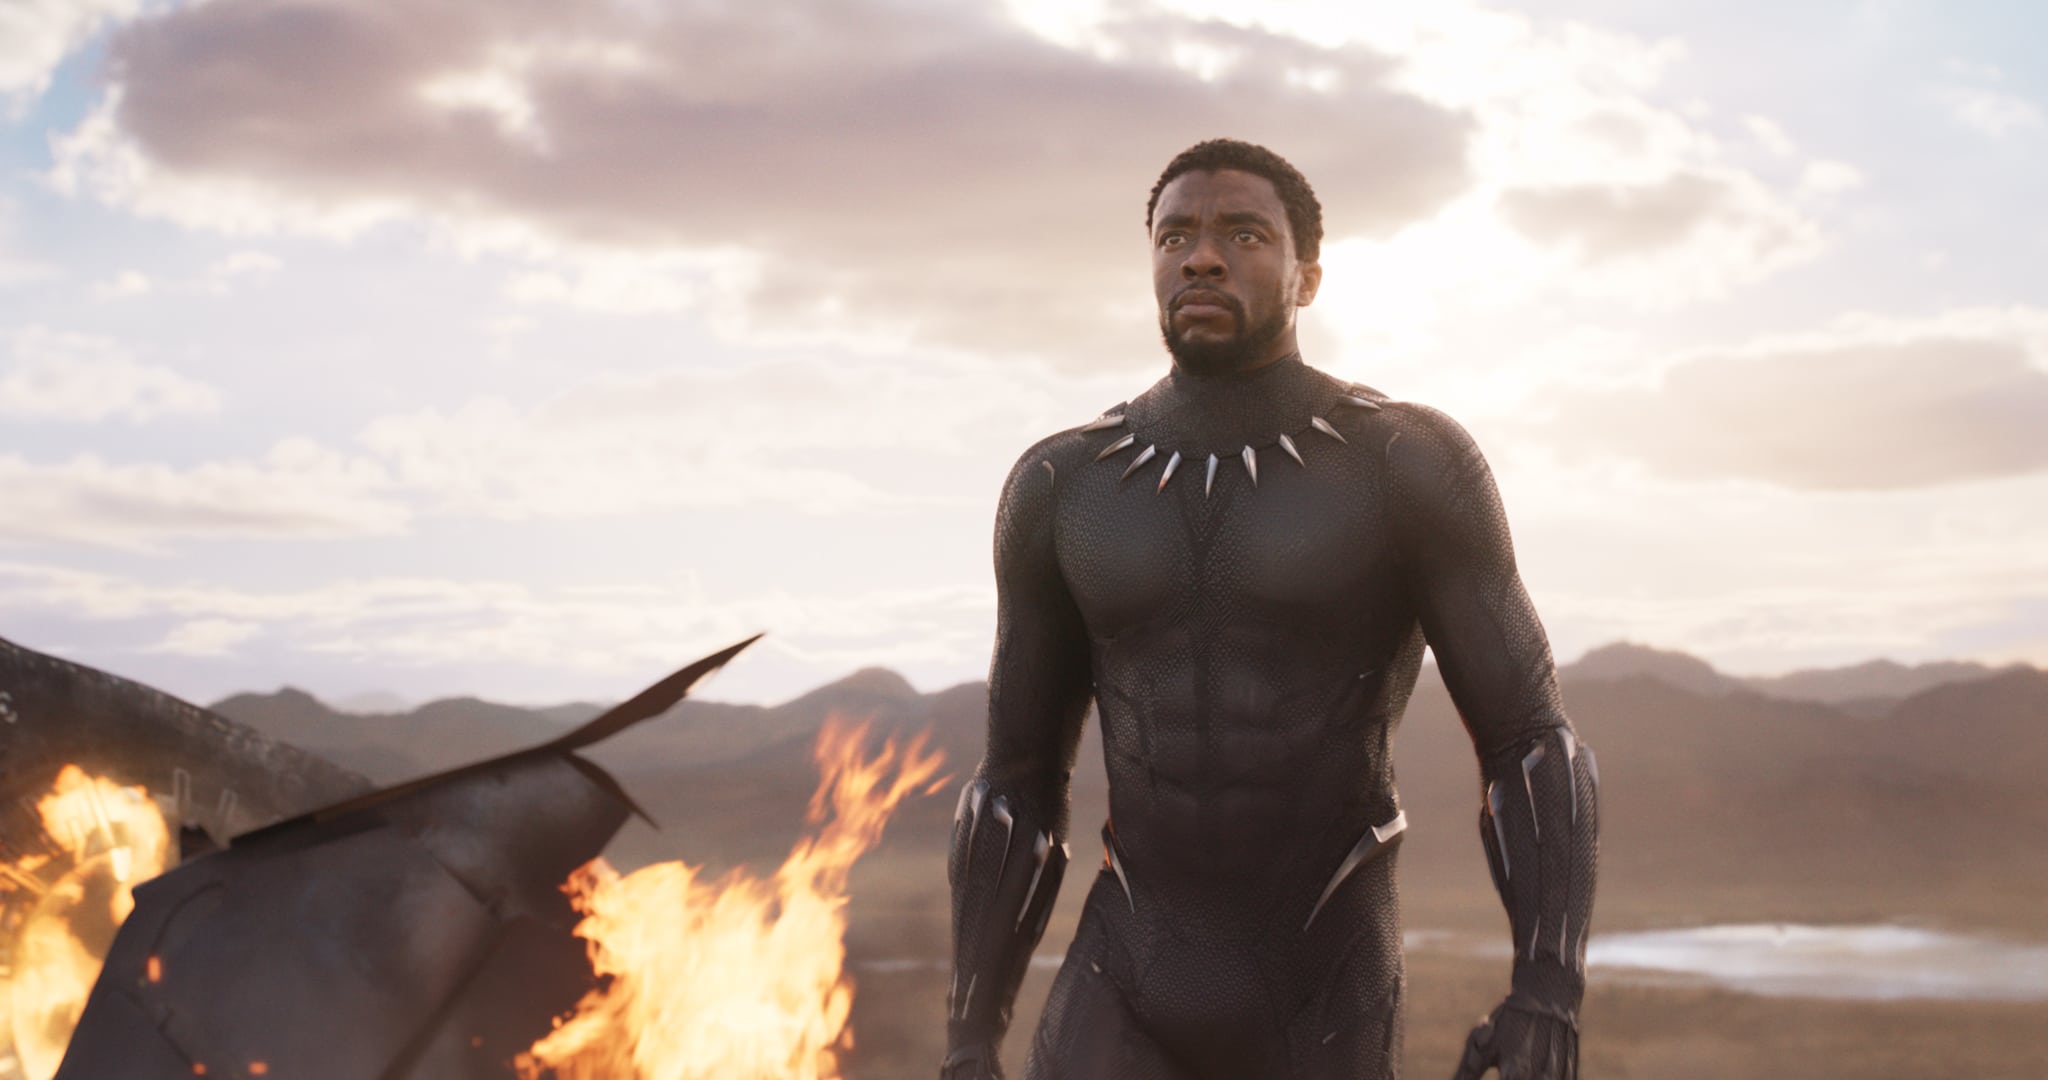 New Black Panther Featurettes, How To Watch Every Marvel Movie Before Endgame